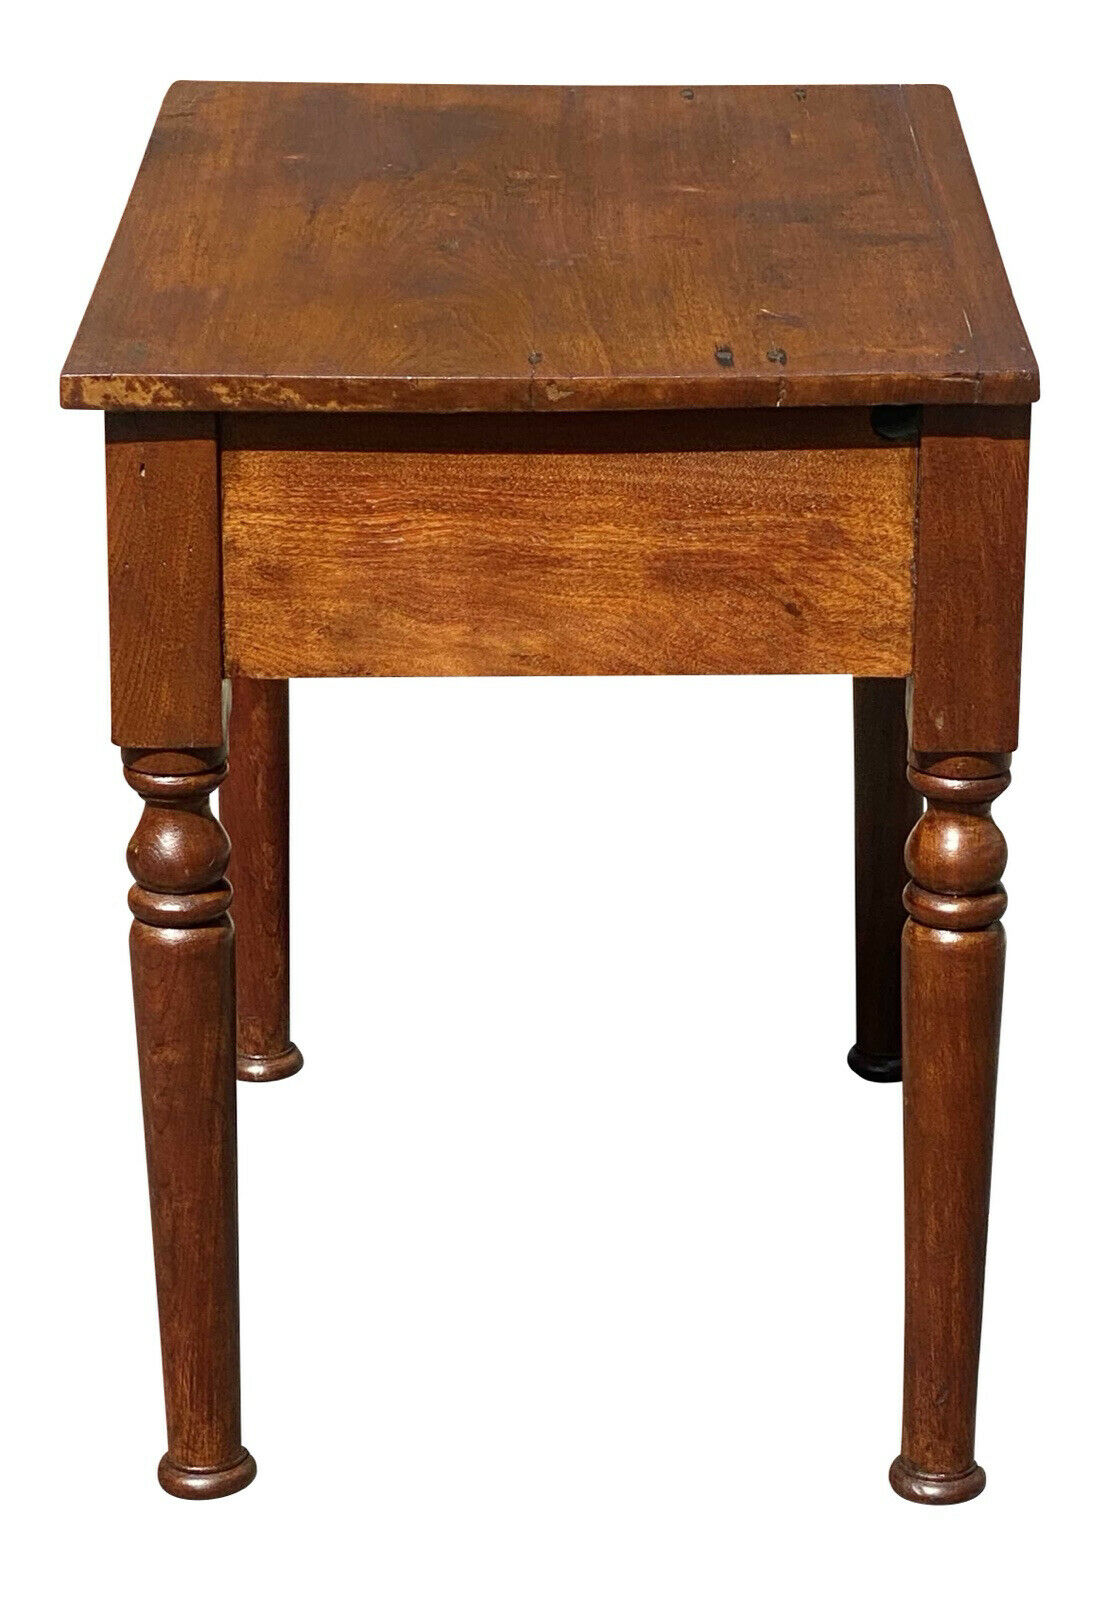 18TH C ANTIQUE FEDERAL PERIOD VIRGINIA WALNUT 1 DRAWER WORK TABLE / NIGHTSTAND